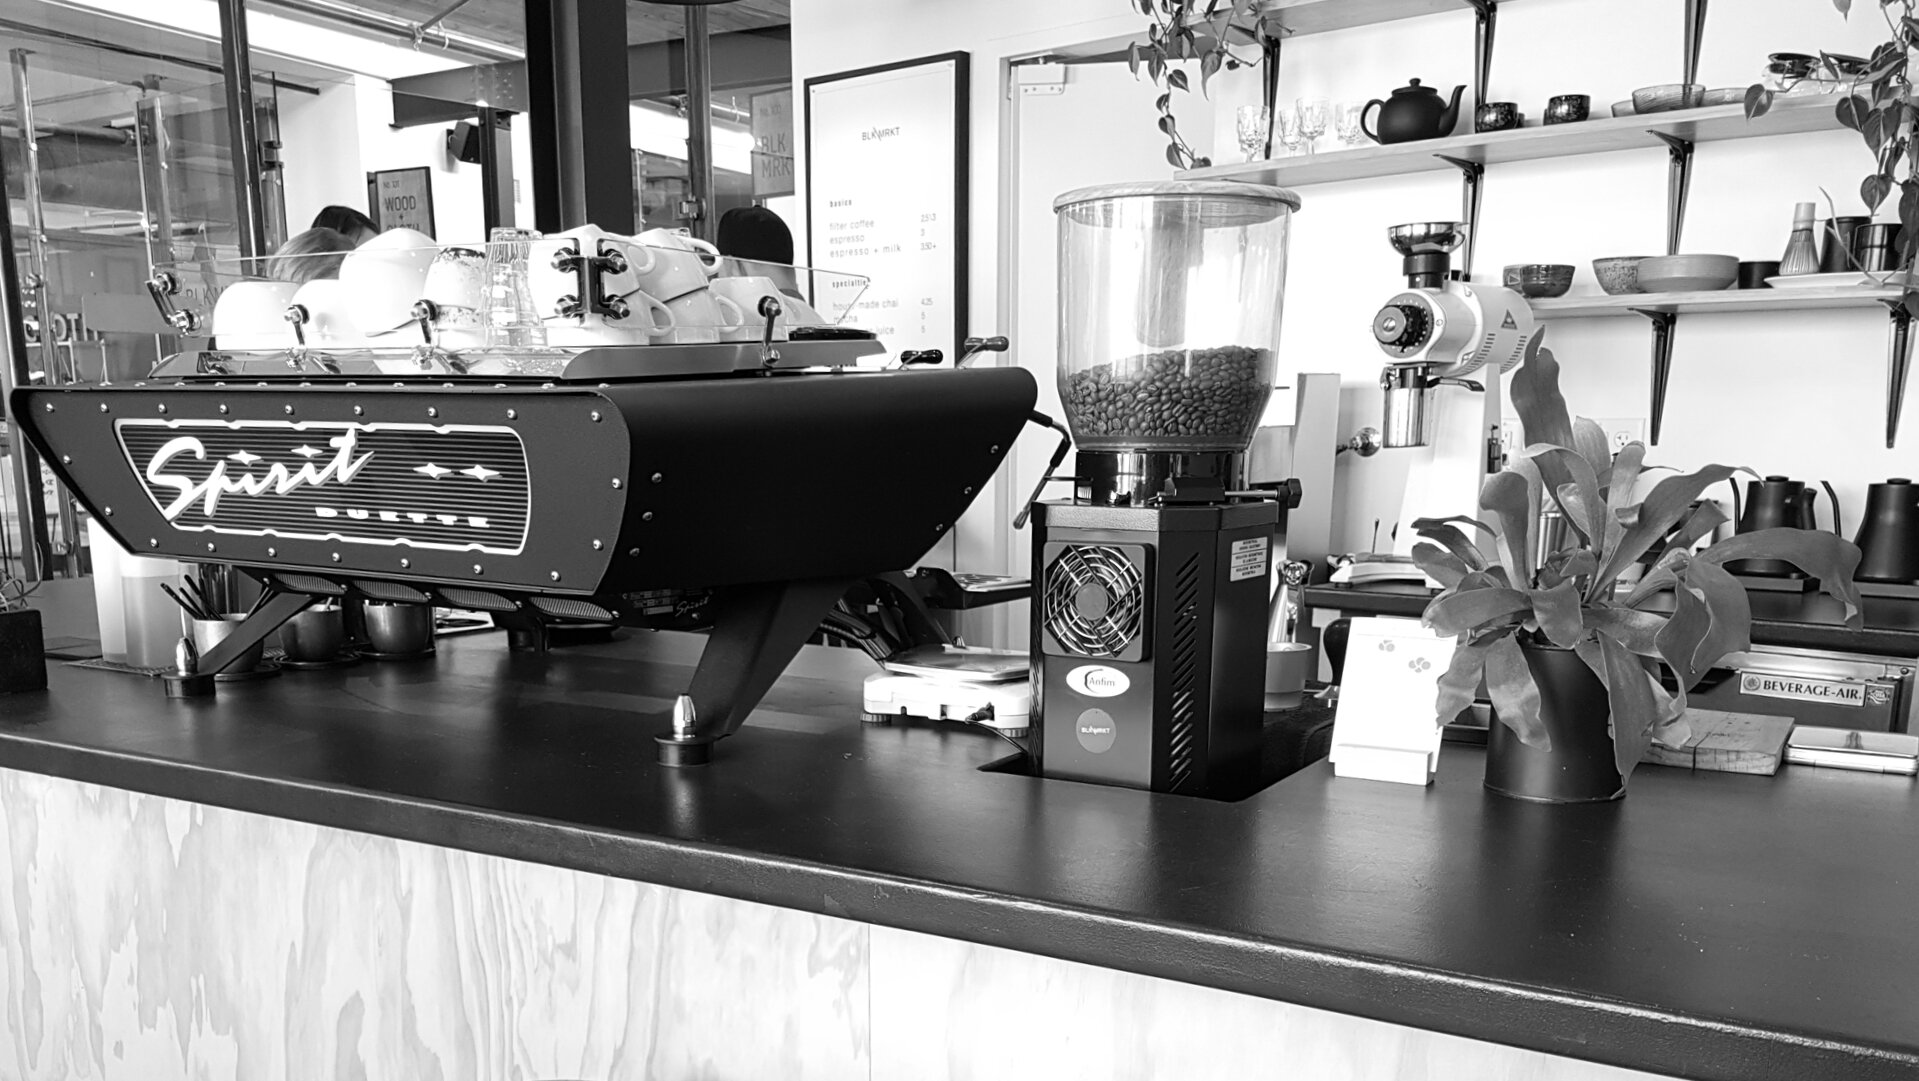 A shot of Blk\Mrkt’s cafe in Traverse City, featuring an espresso machine and grinders sitting atop a wooden bar